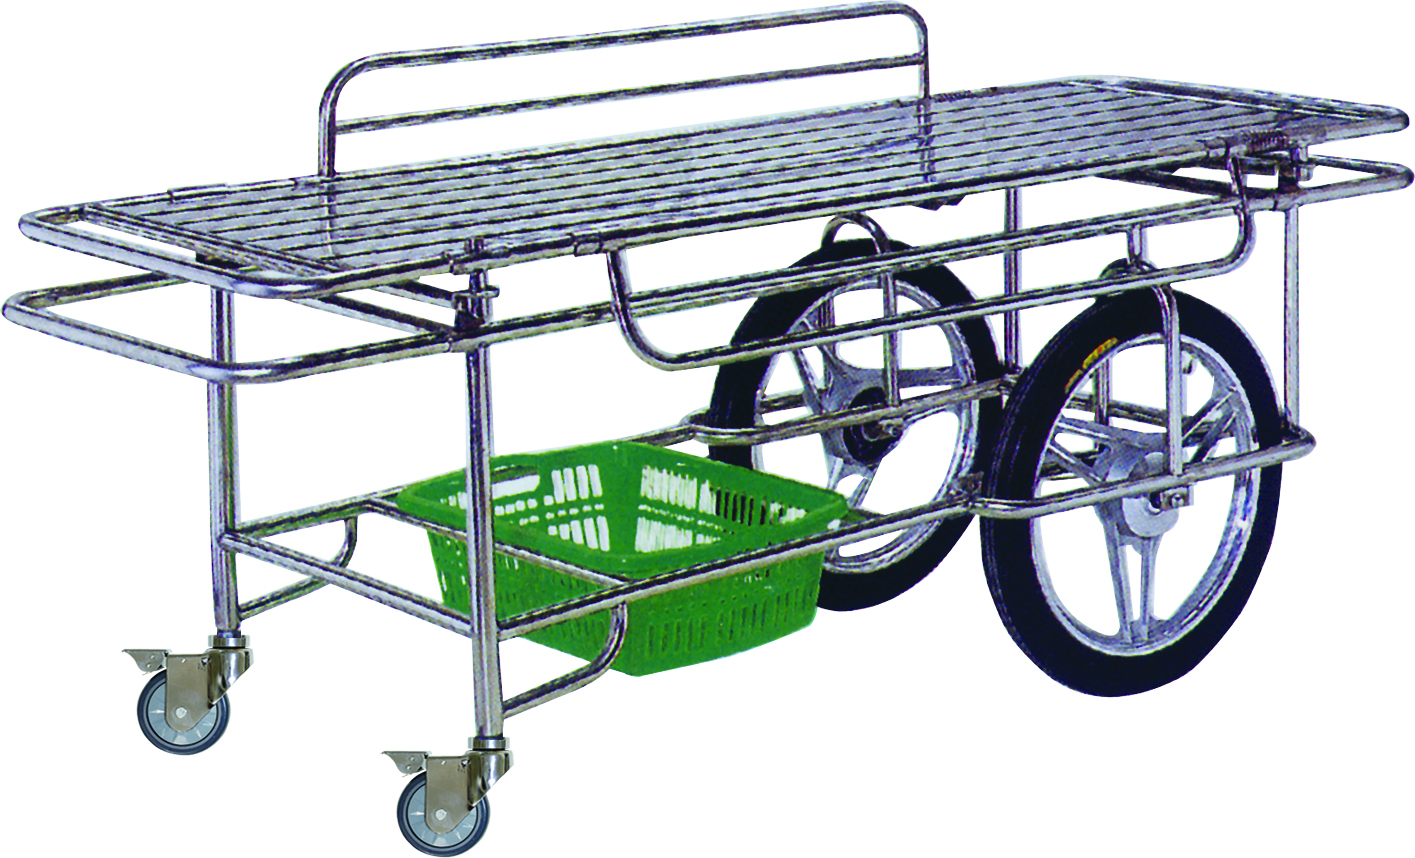 B-5 Stainless steel stretcher with 2 big 2 small wheels